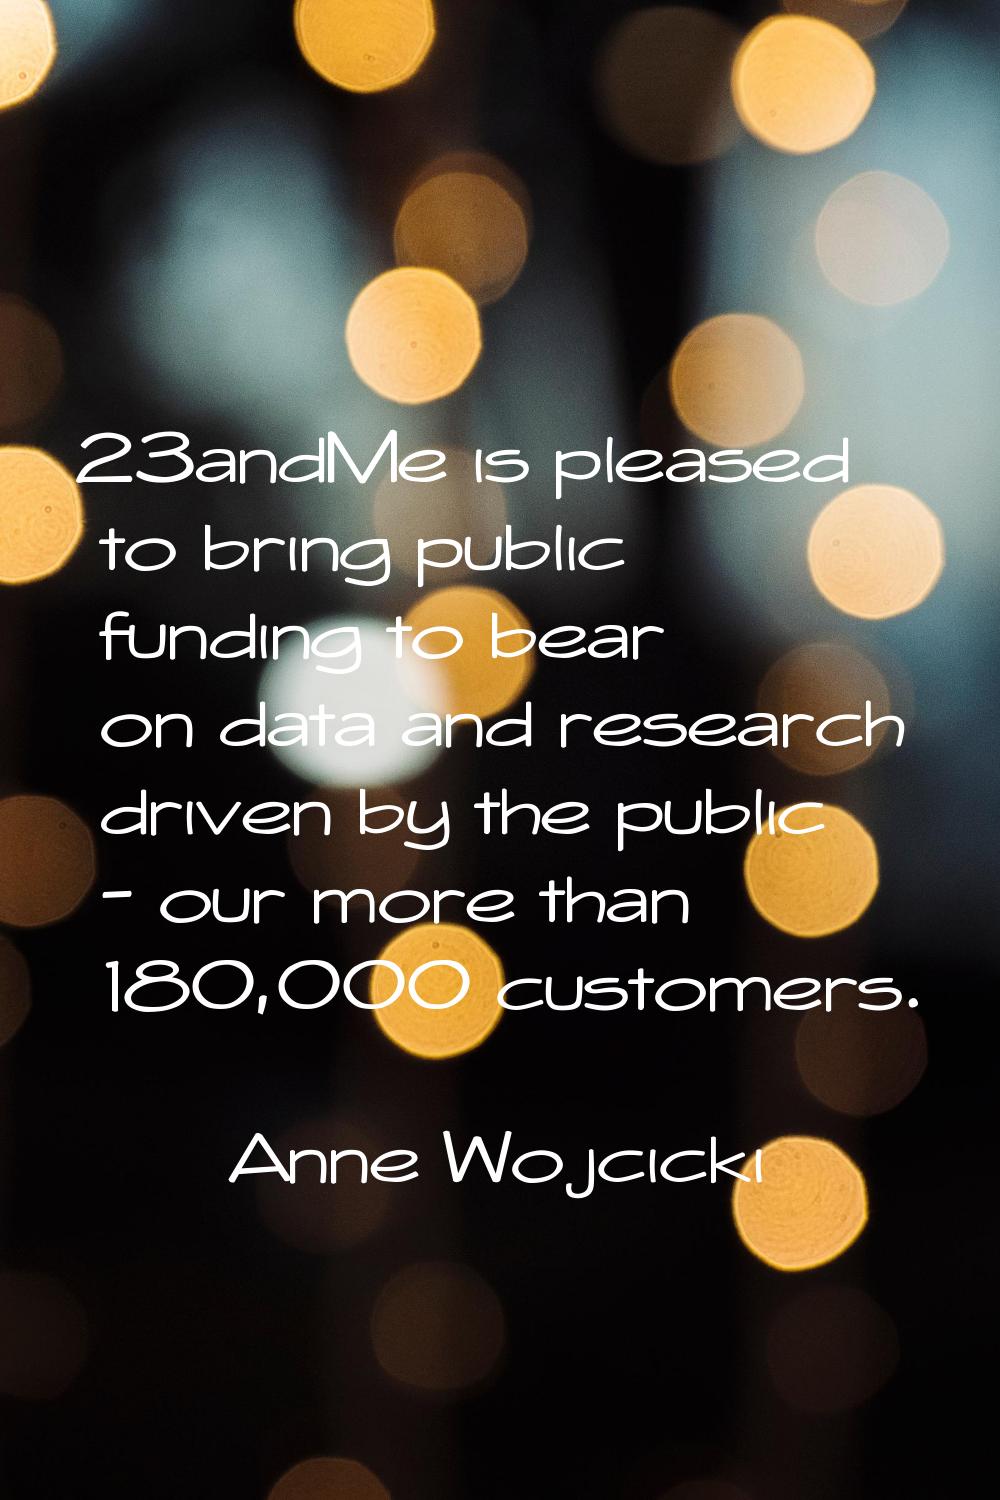 23andMe is pleased to bring public funding to bear on data and research driven by the public - our 